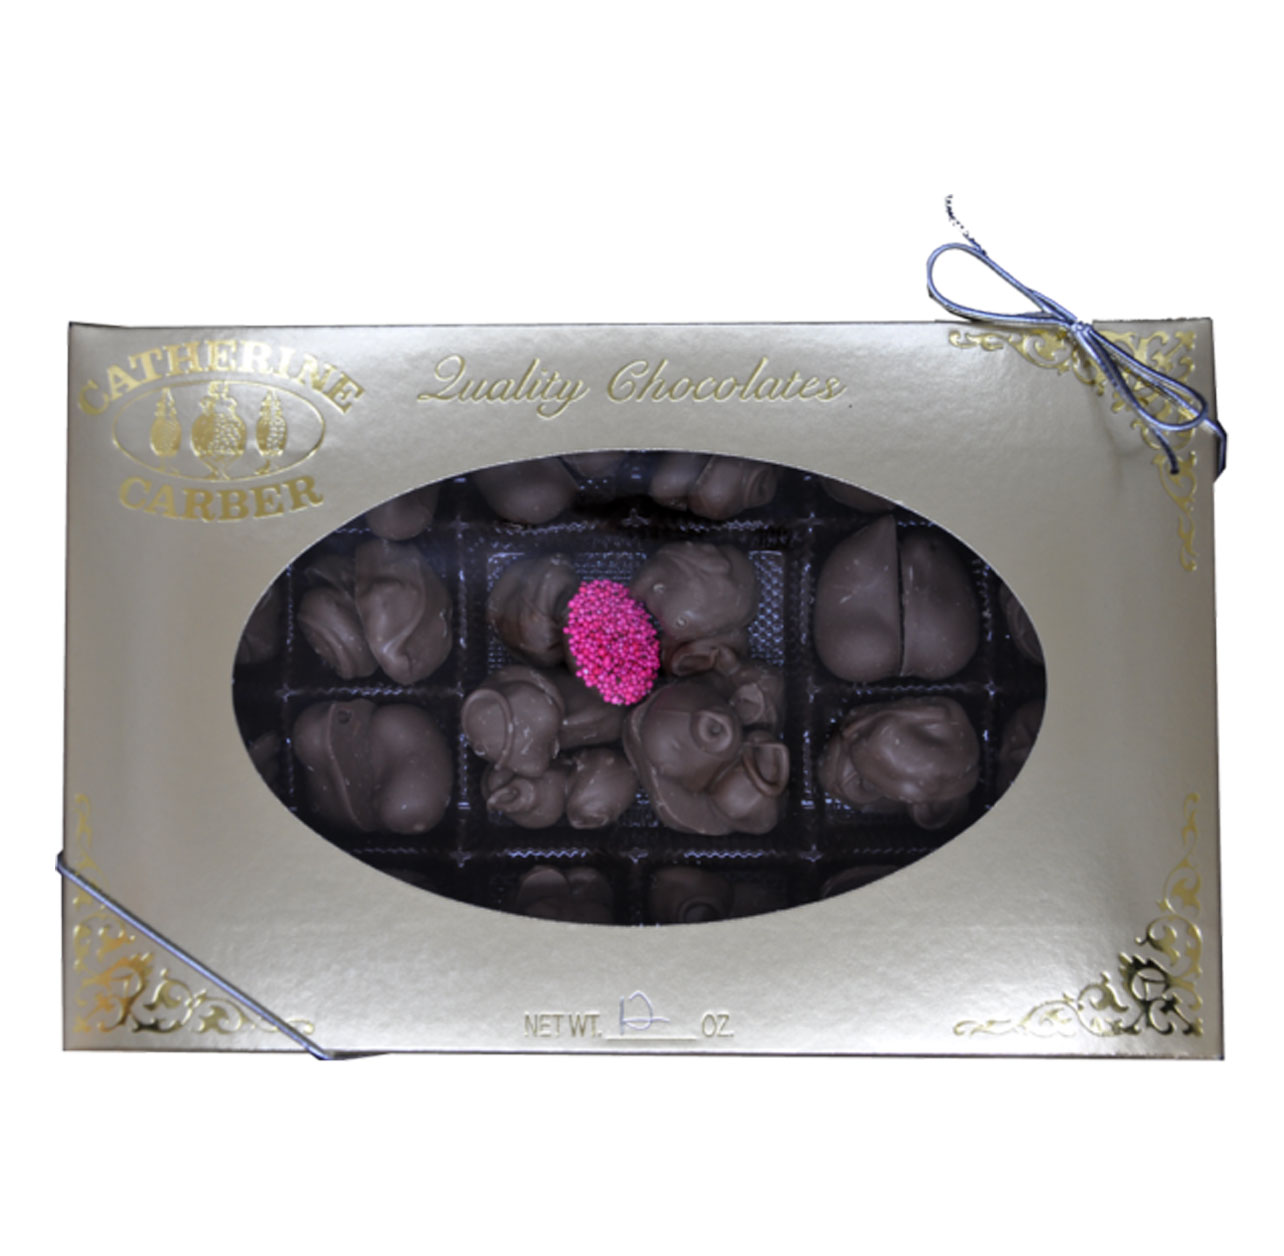  - Carber Chocolates - Delicious Hand-Made Chocolates - Carber Chocolates - Hand-Crafted Chocolates